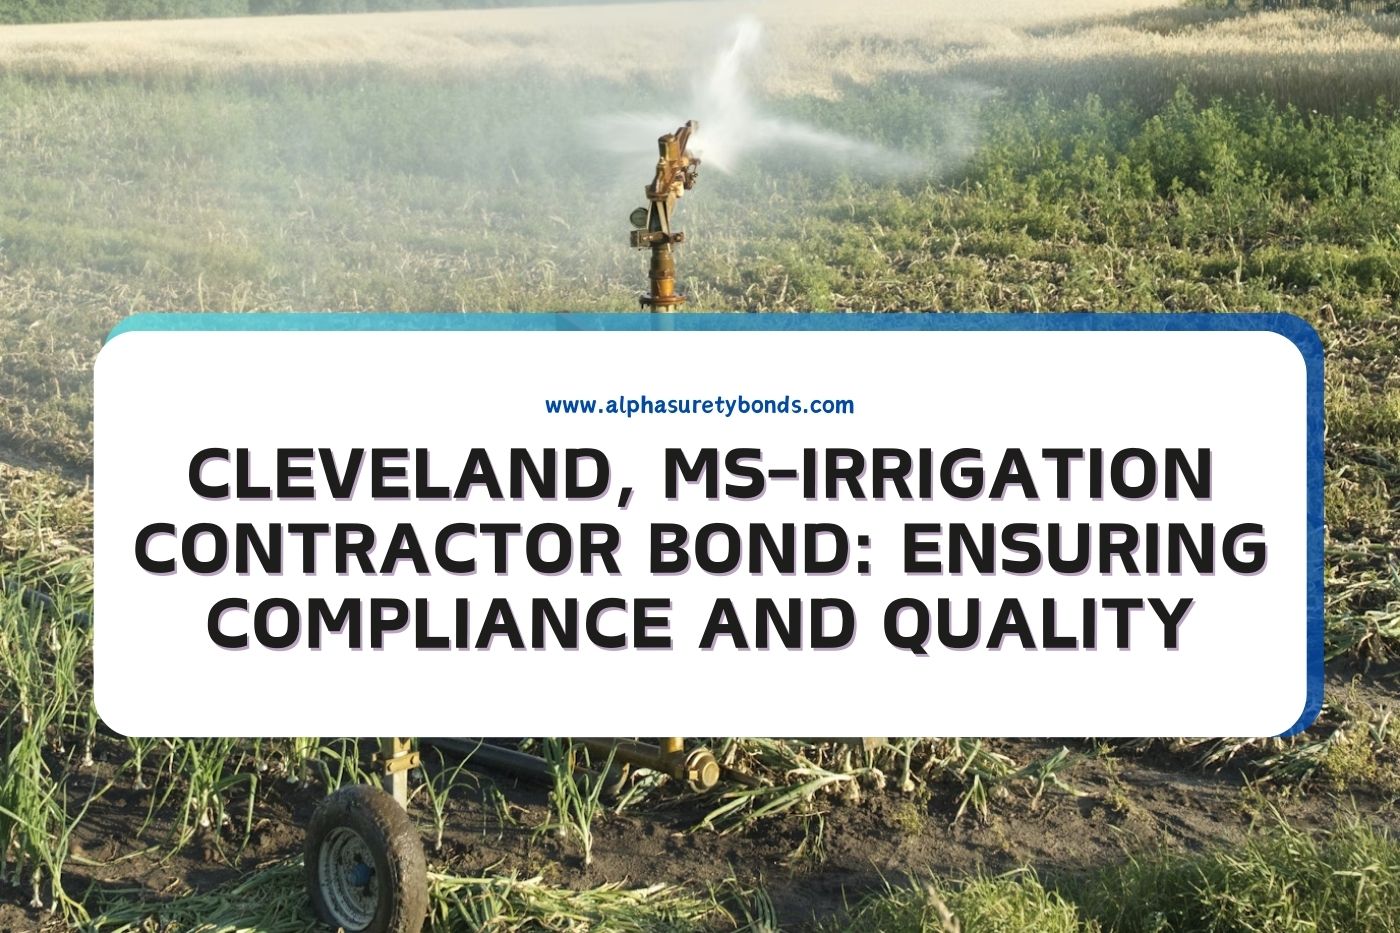 Cleveland, MS-Irrigation Contractor Bond: Ensuring Compliance and Quality